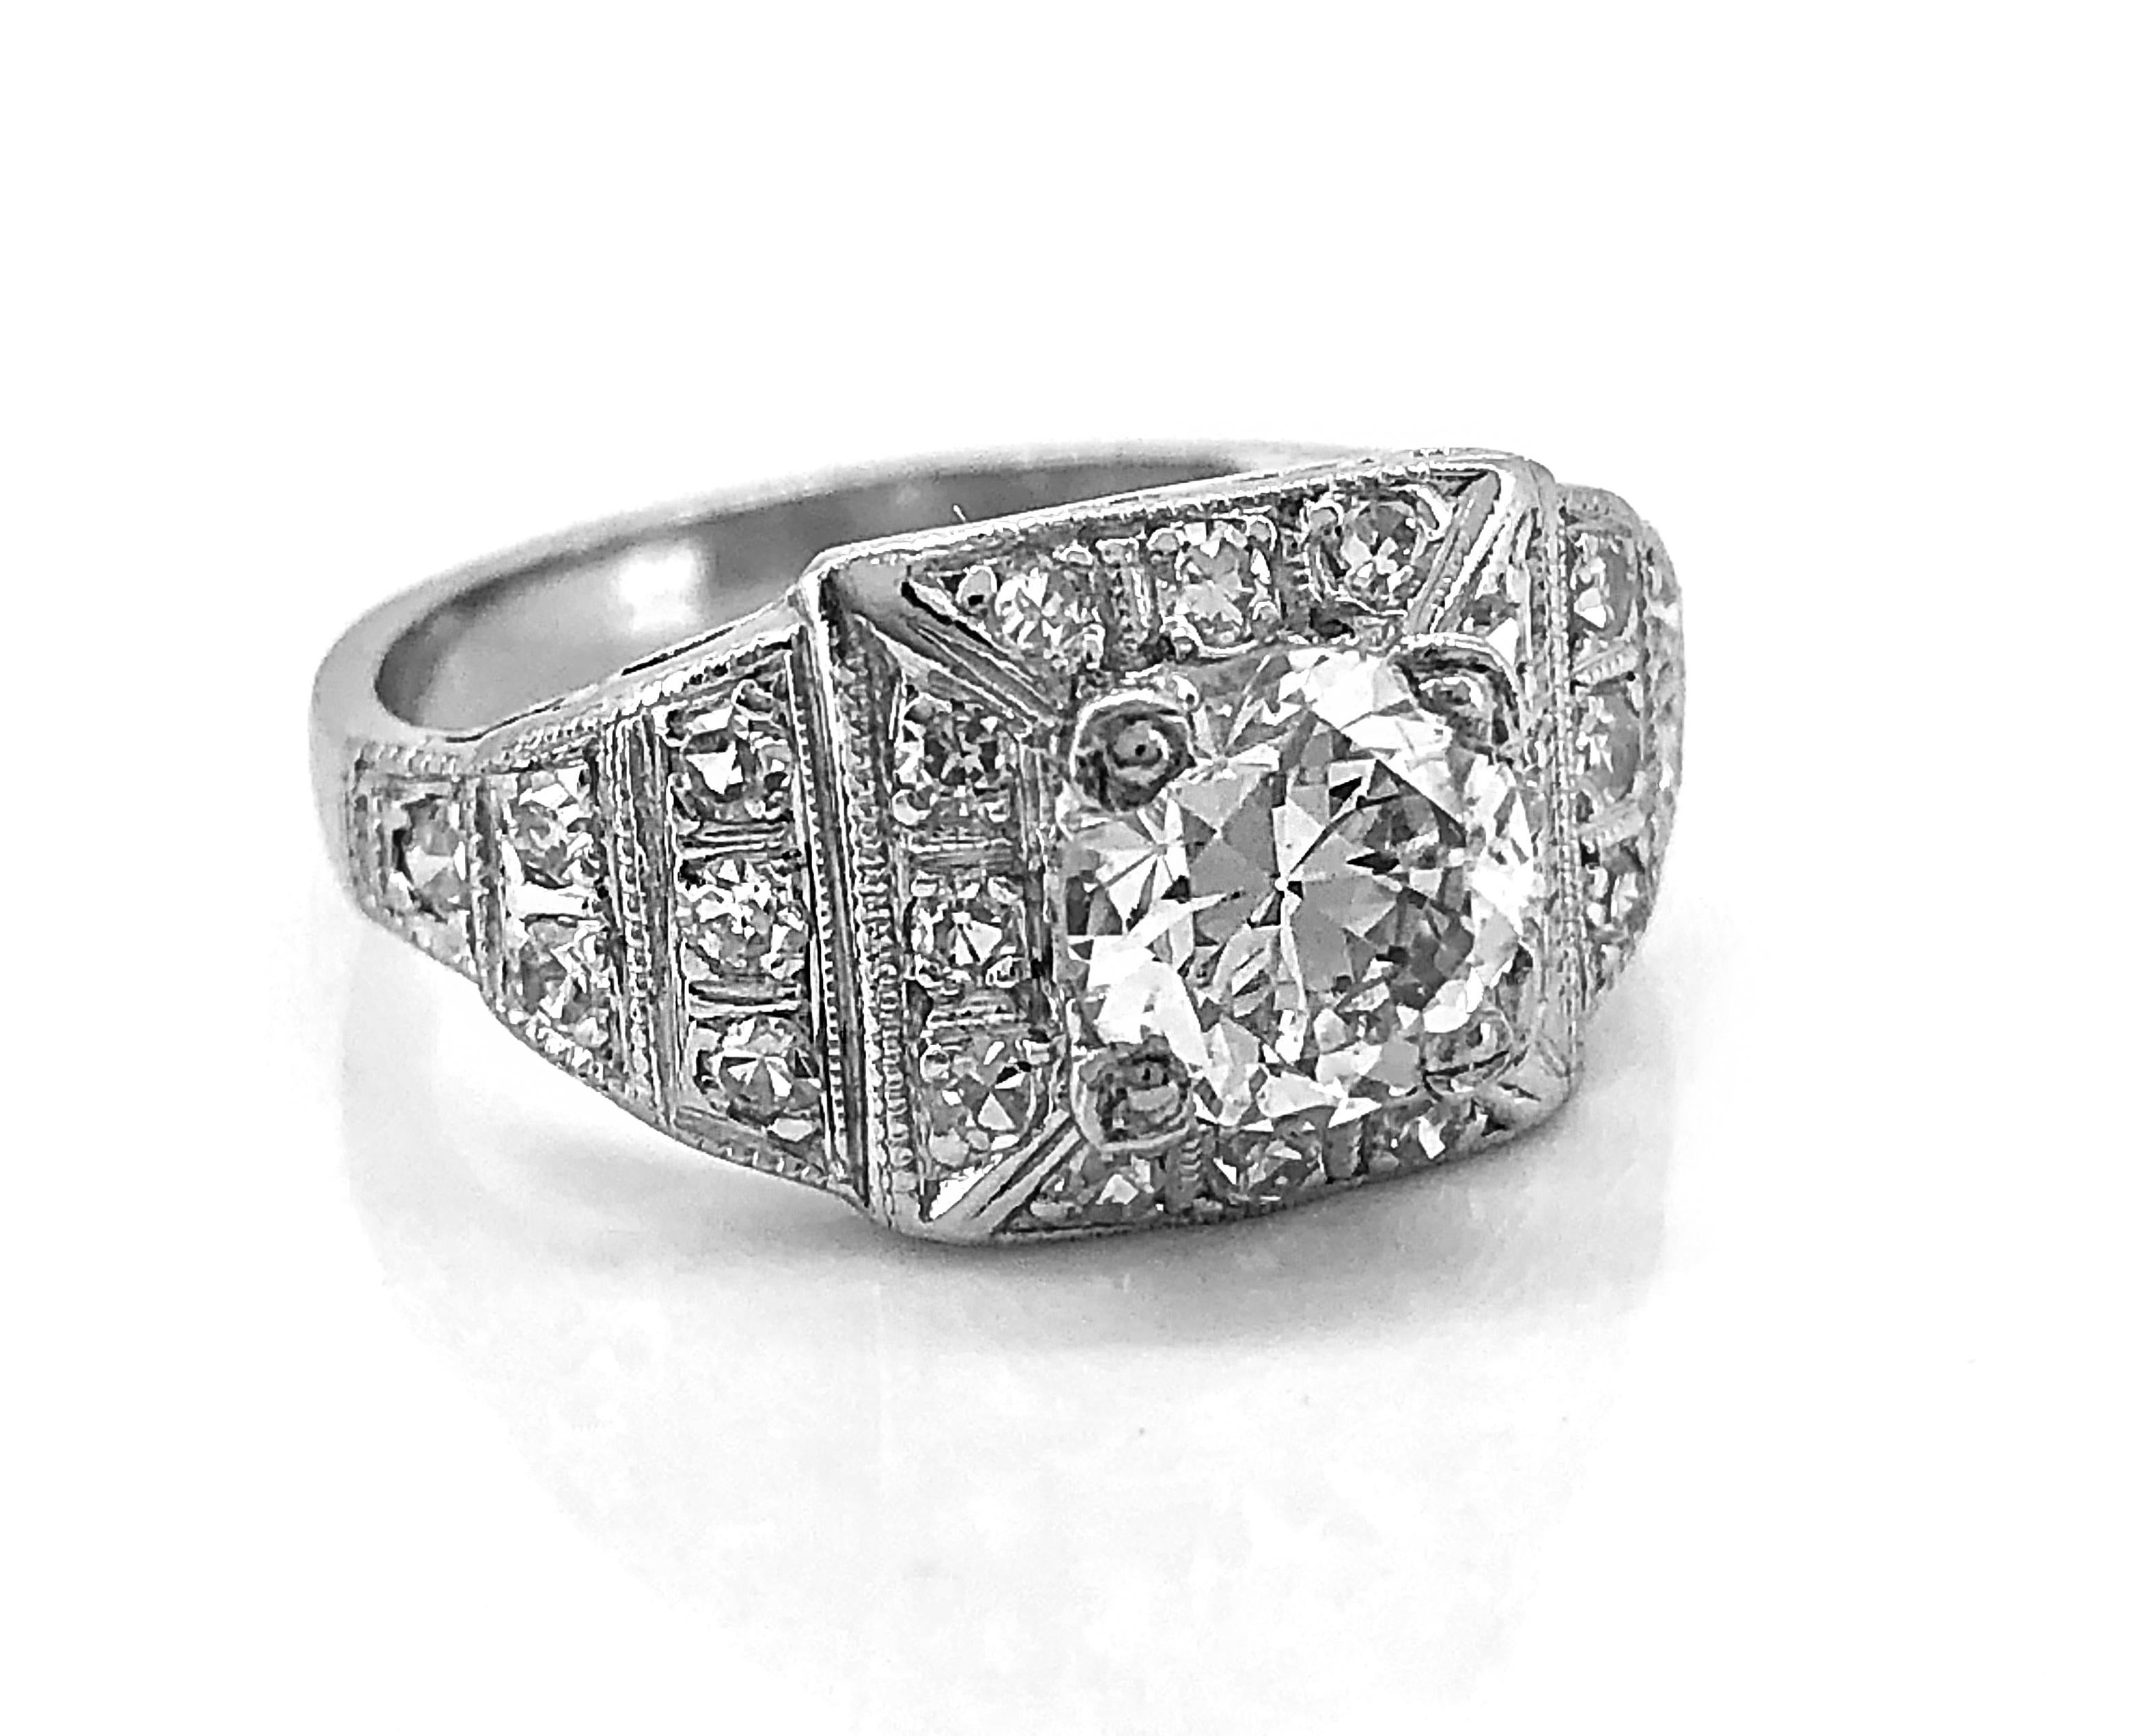 A stunning platinum antique engagement ring featuring a .97ct. apx. European cut center diamond with SI3 clarity and H color. The center diamond is set with trefoil prongs and is surrounded with diamonds in a square style with a step down pattern on